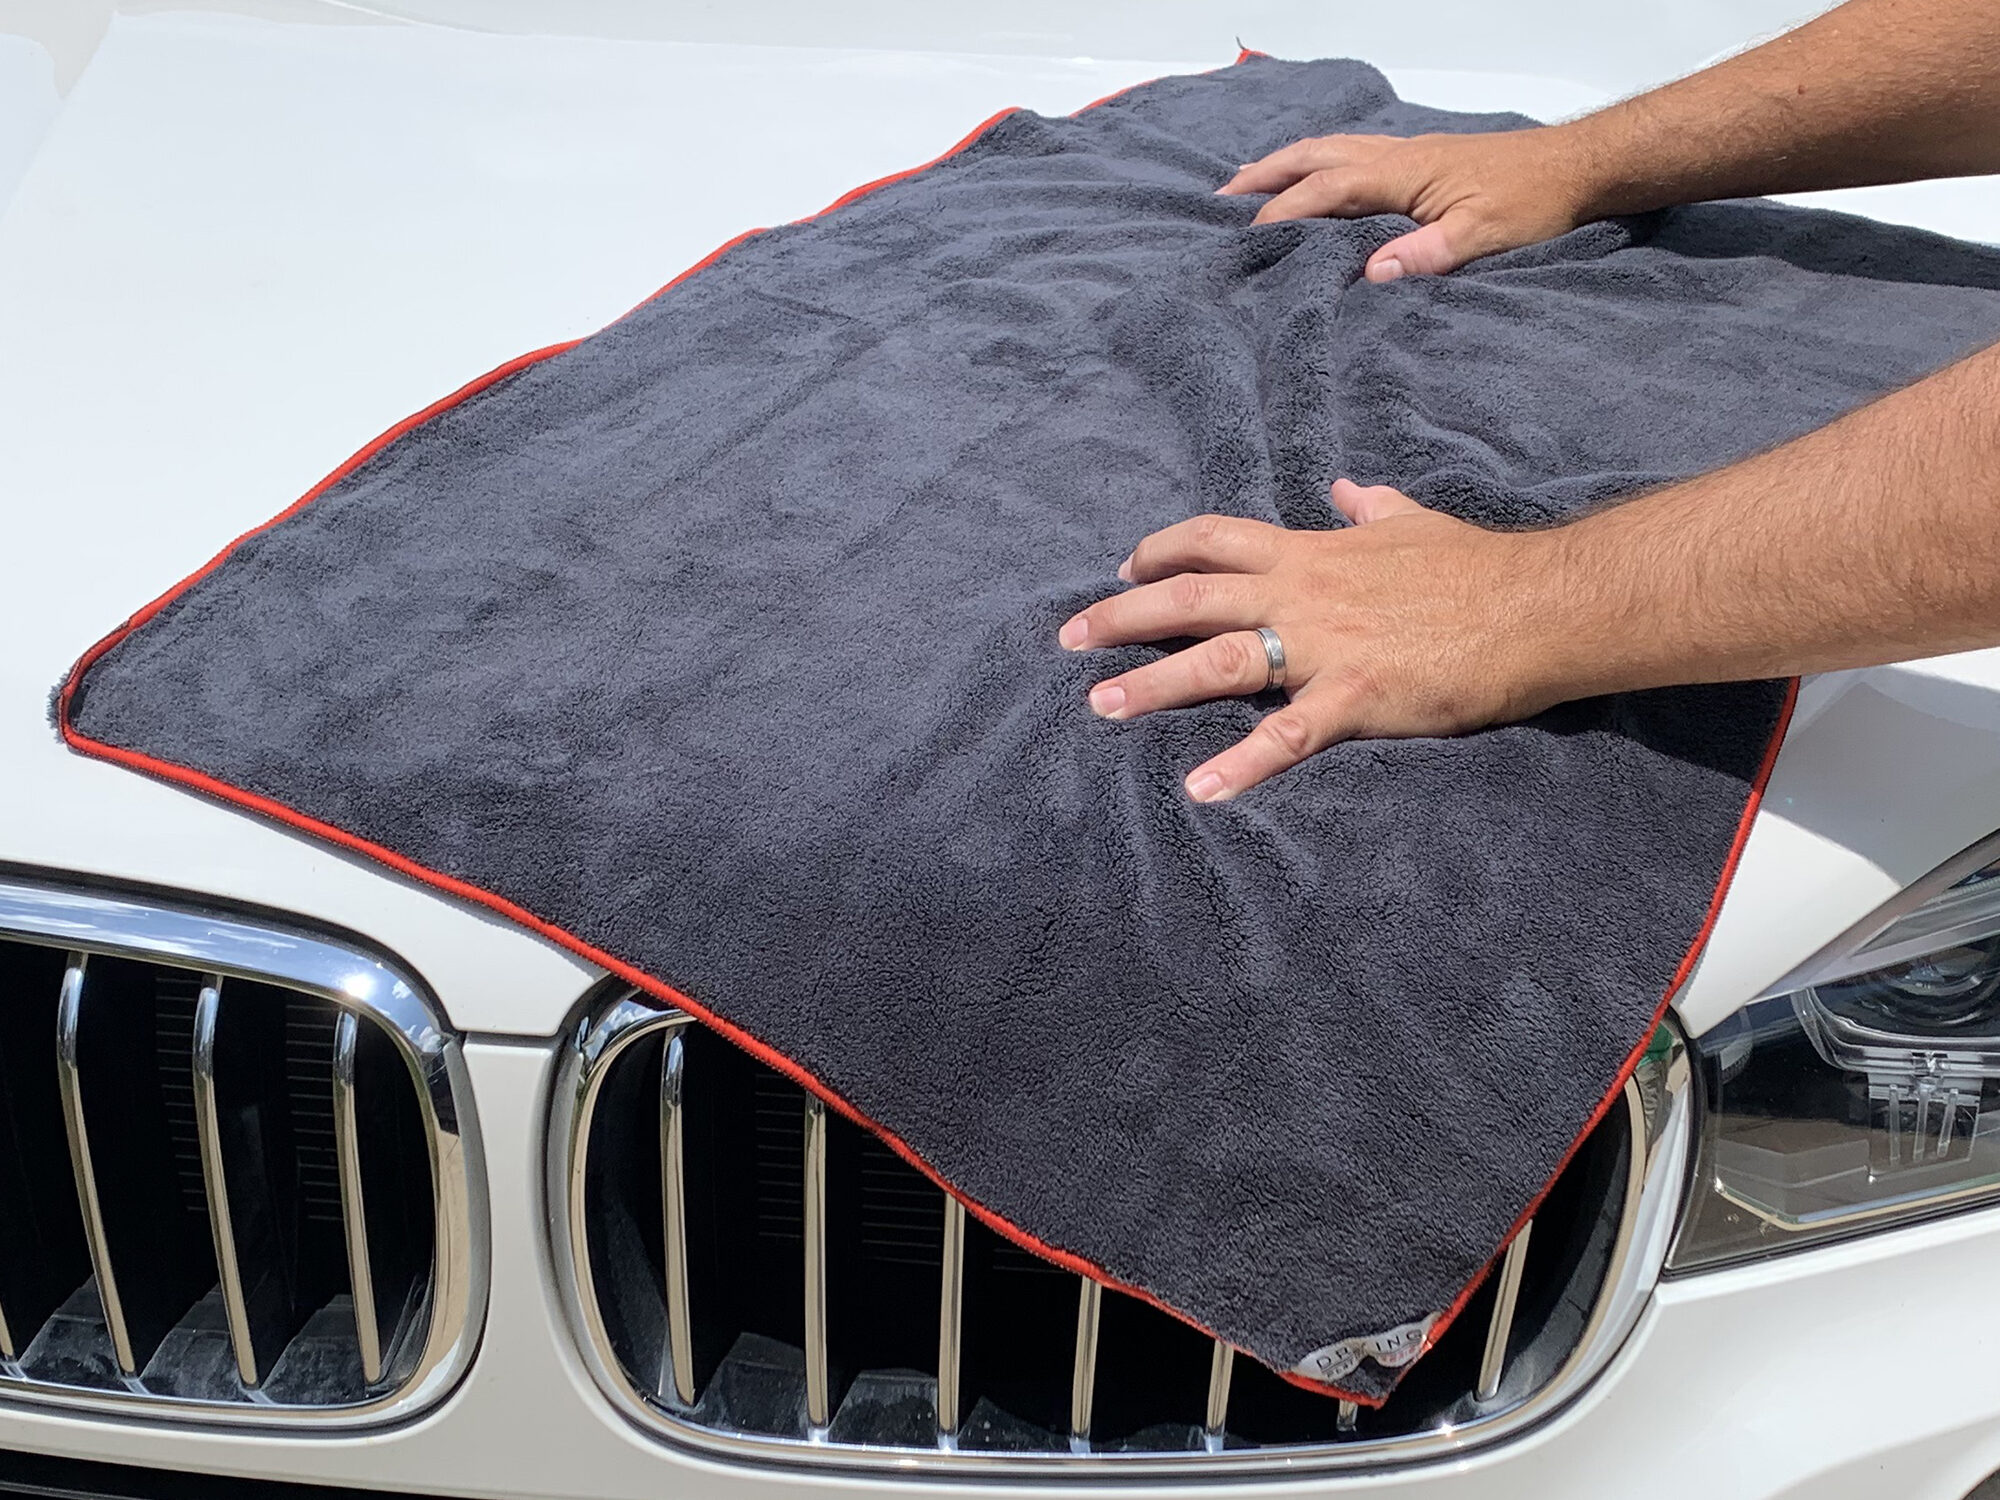 Best Drying Towels for Cars